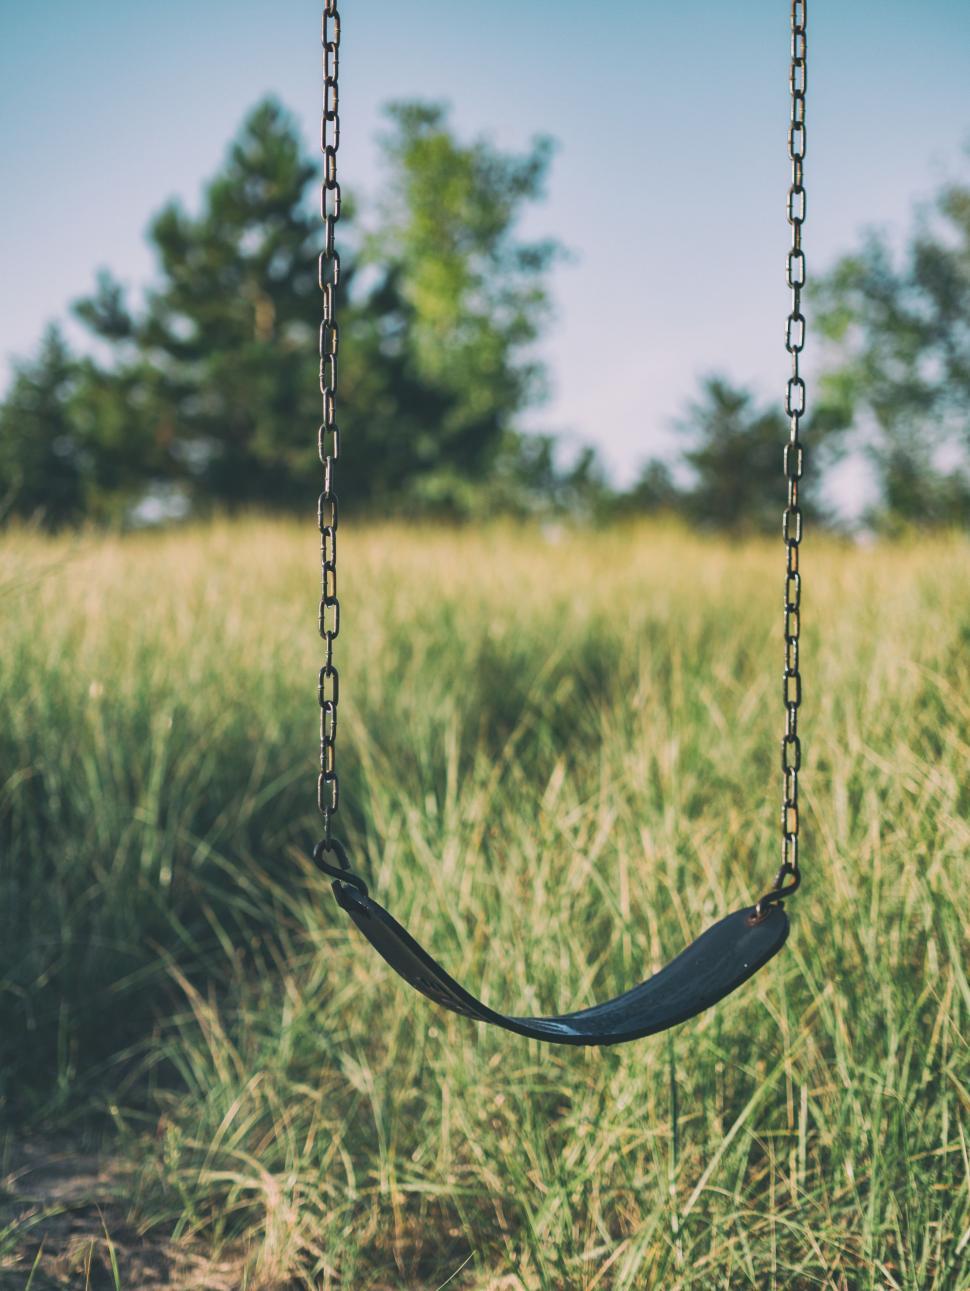 Free Image of Swing in Grassy Field With Trees 